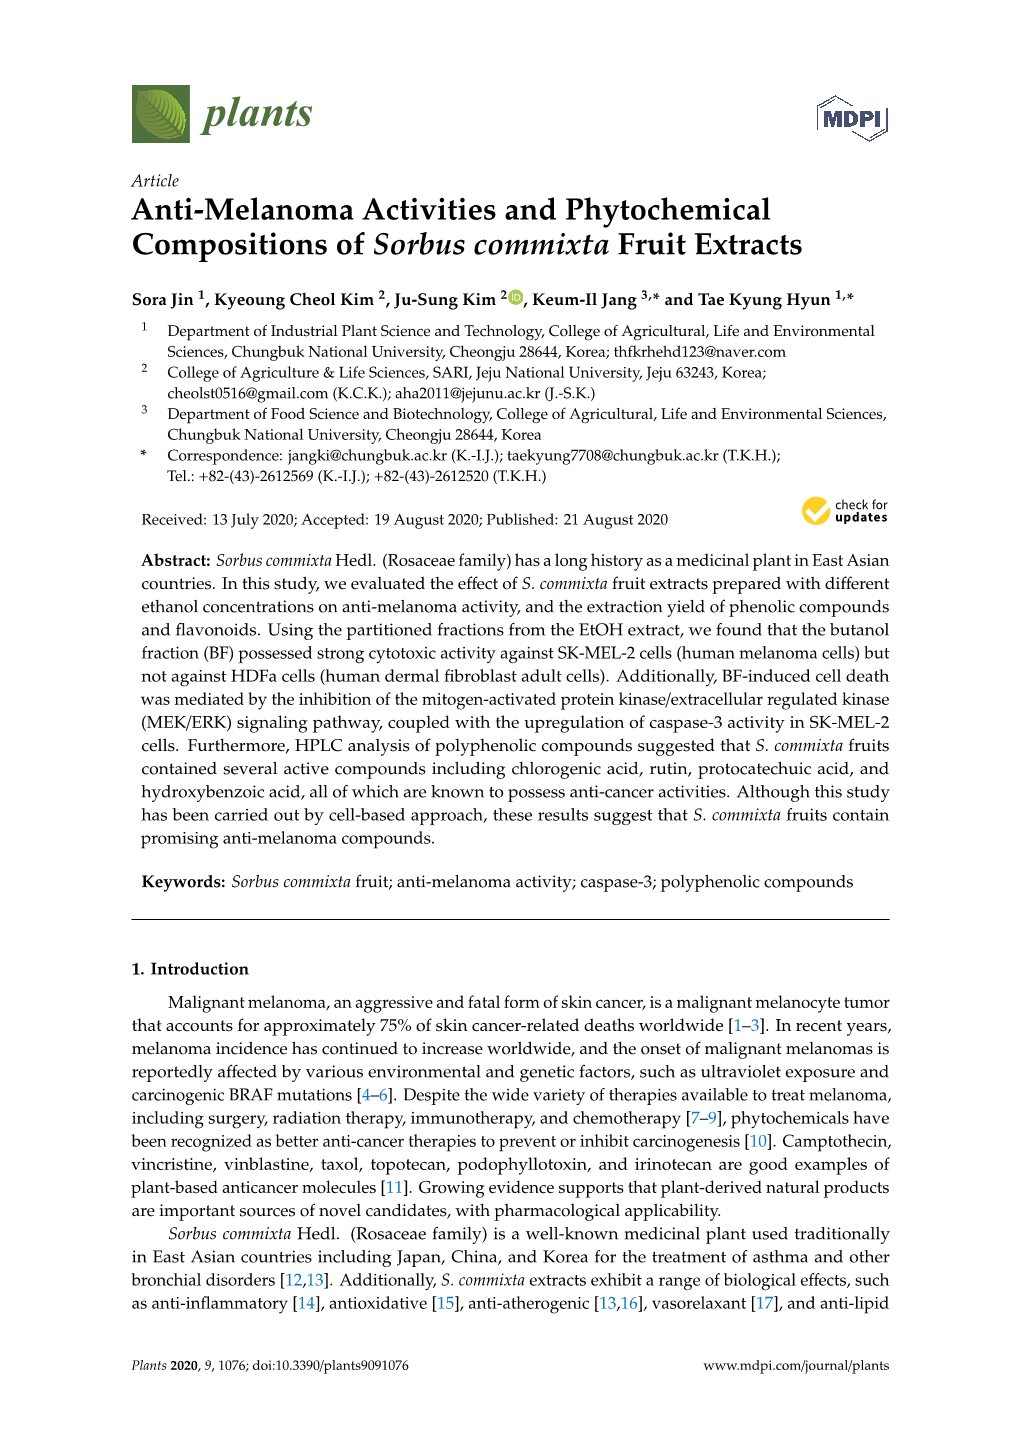 Anti-Melanoma Activities and Phytochemical Compositions of Sorbus Commixta Fruit Extracts